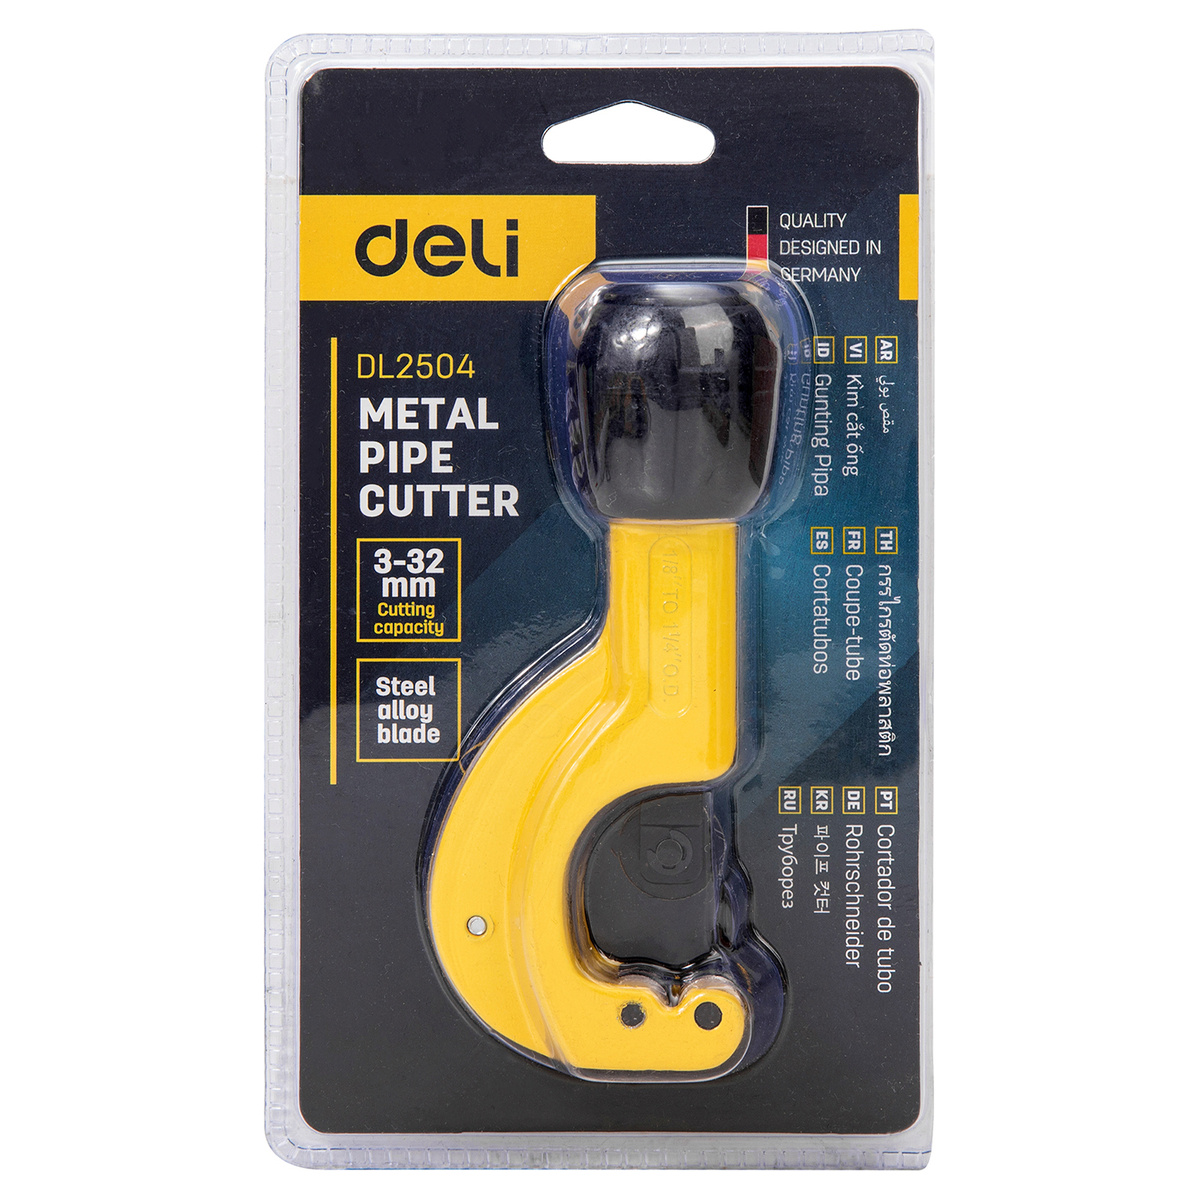 Metal pipe cutter 32mm Deli Tools EDL2504 (yellow)